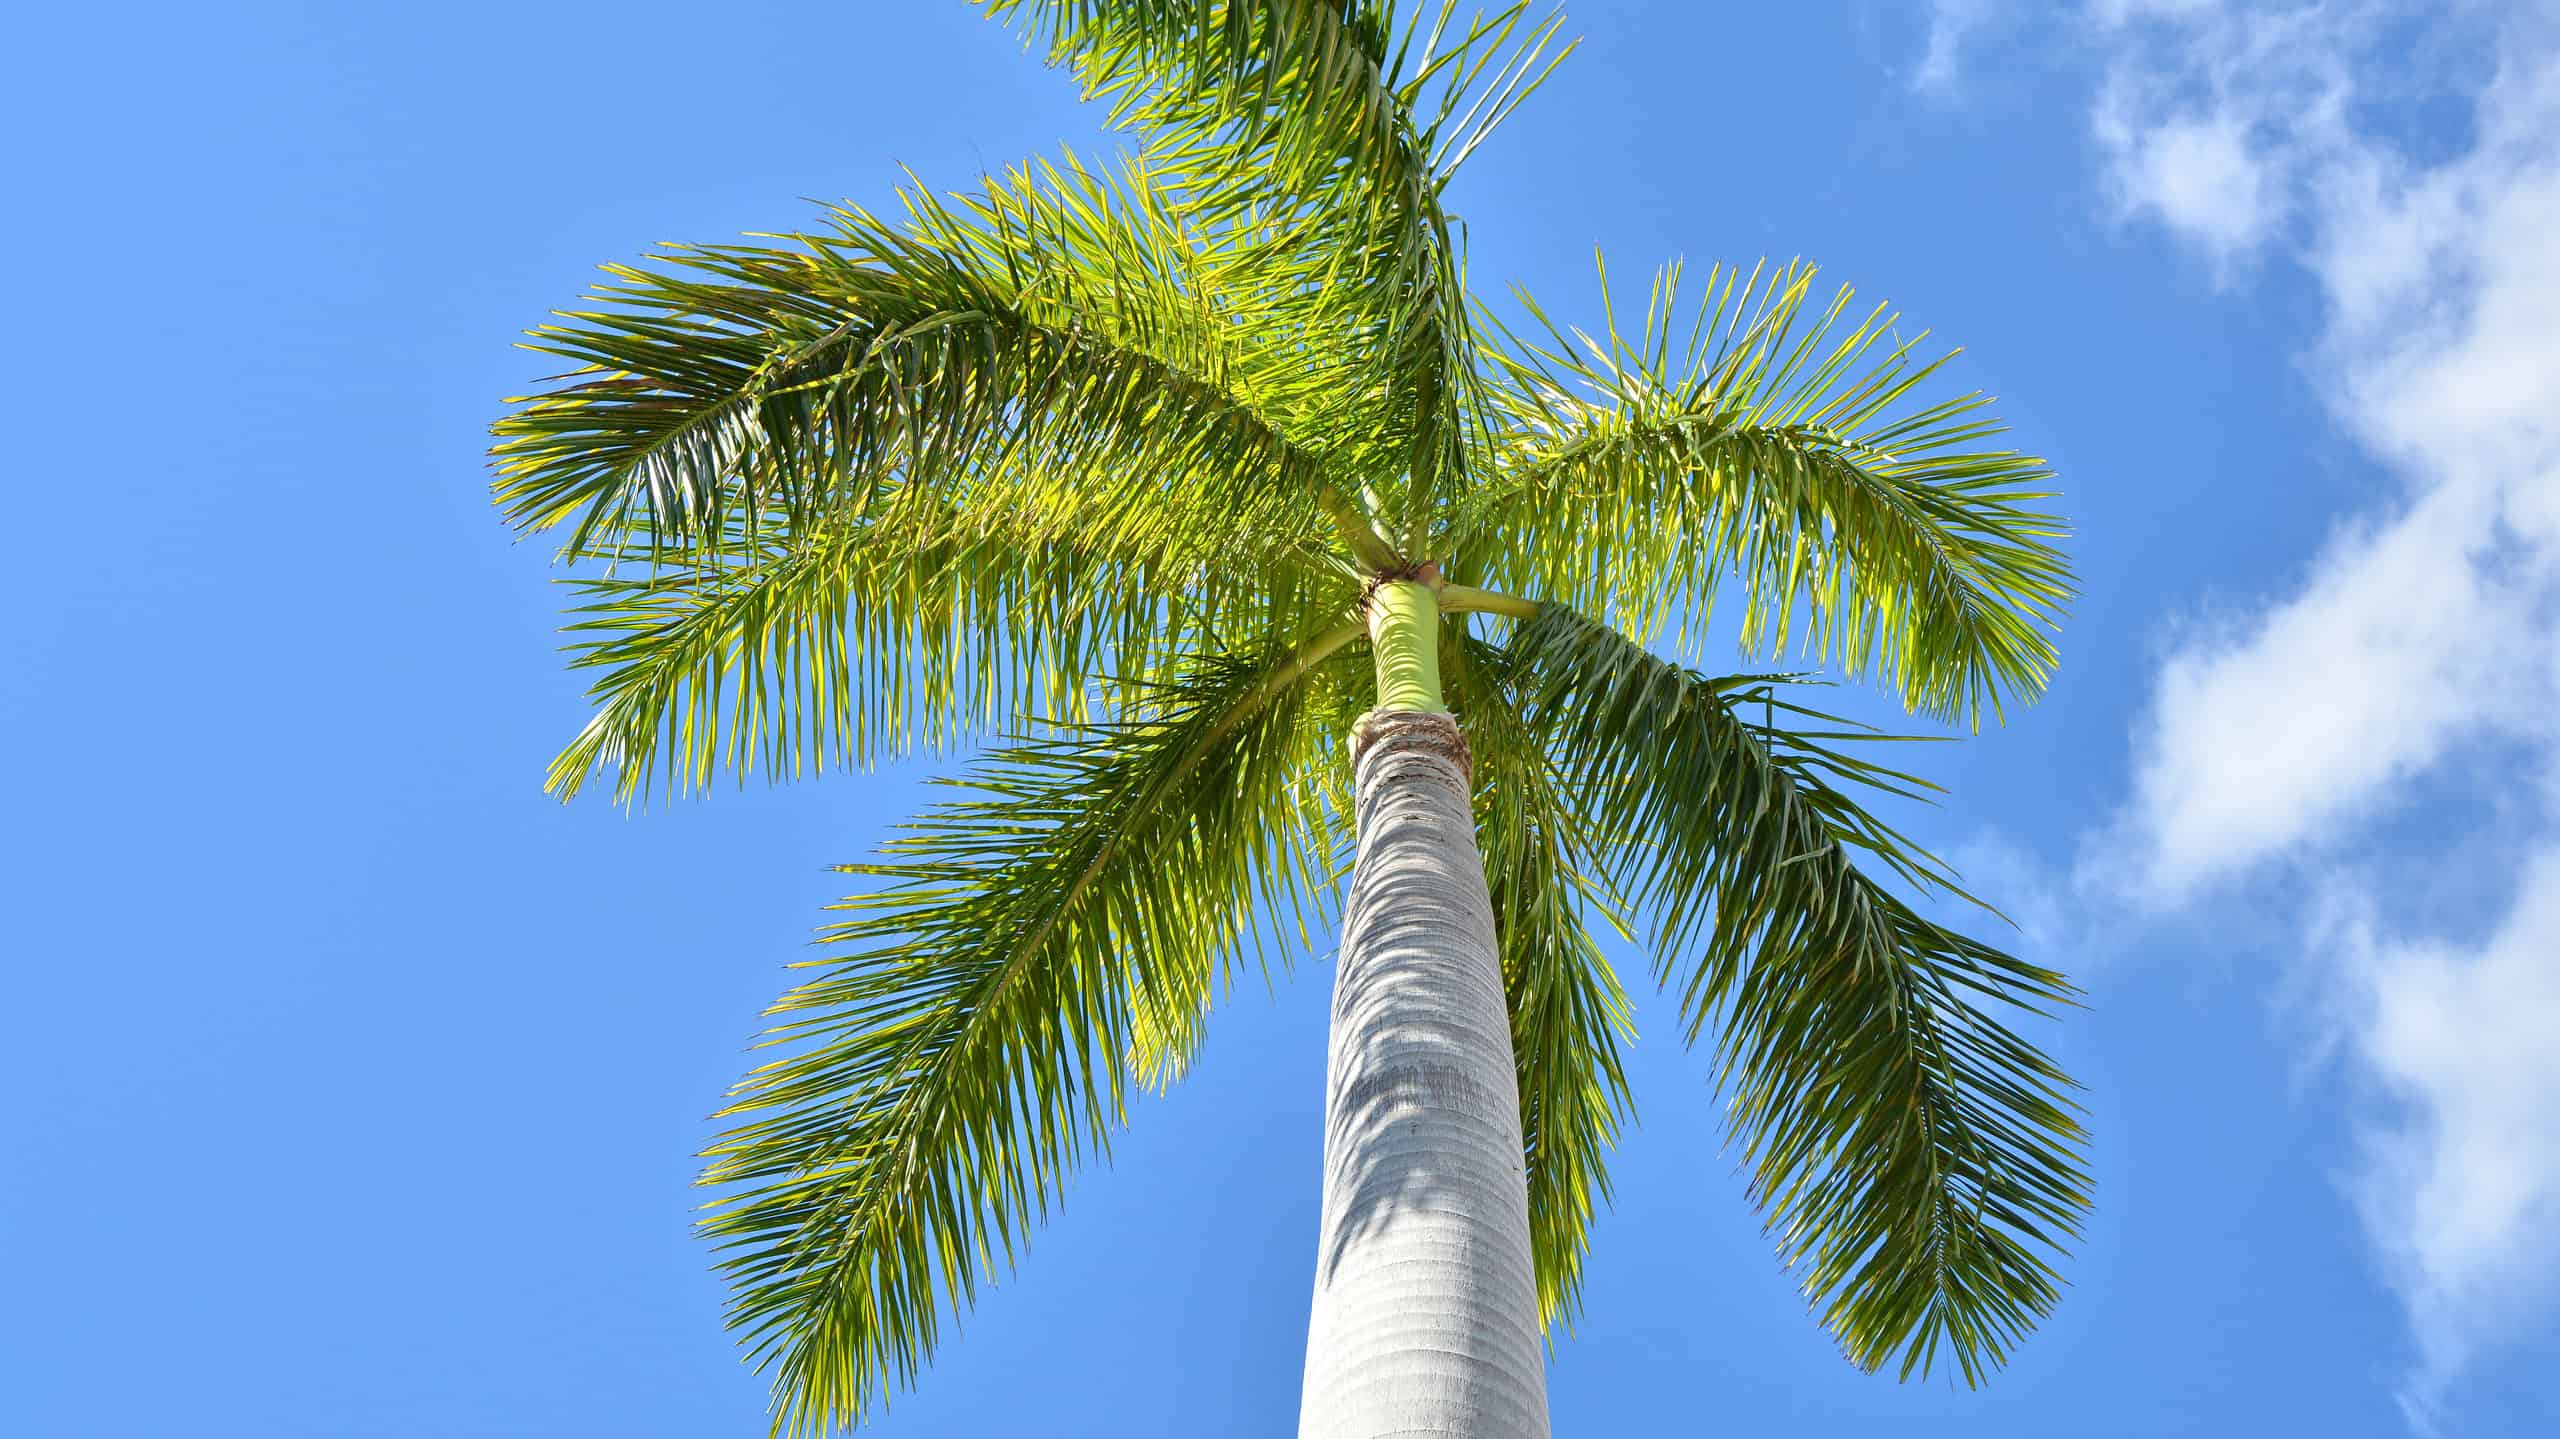 Royal Palm Tree - Varieties, How to Propagate and More - A-Z Animals